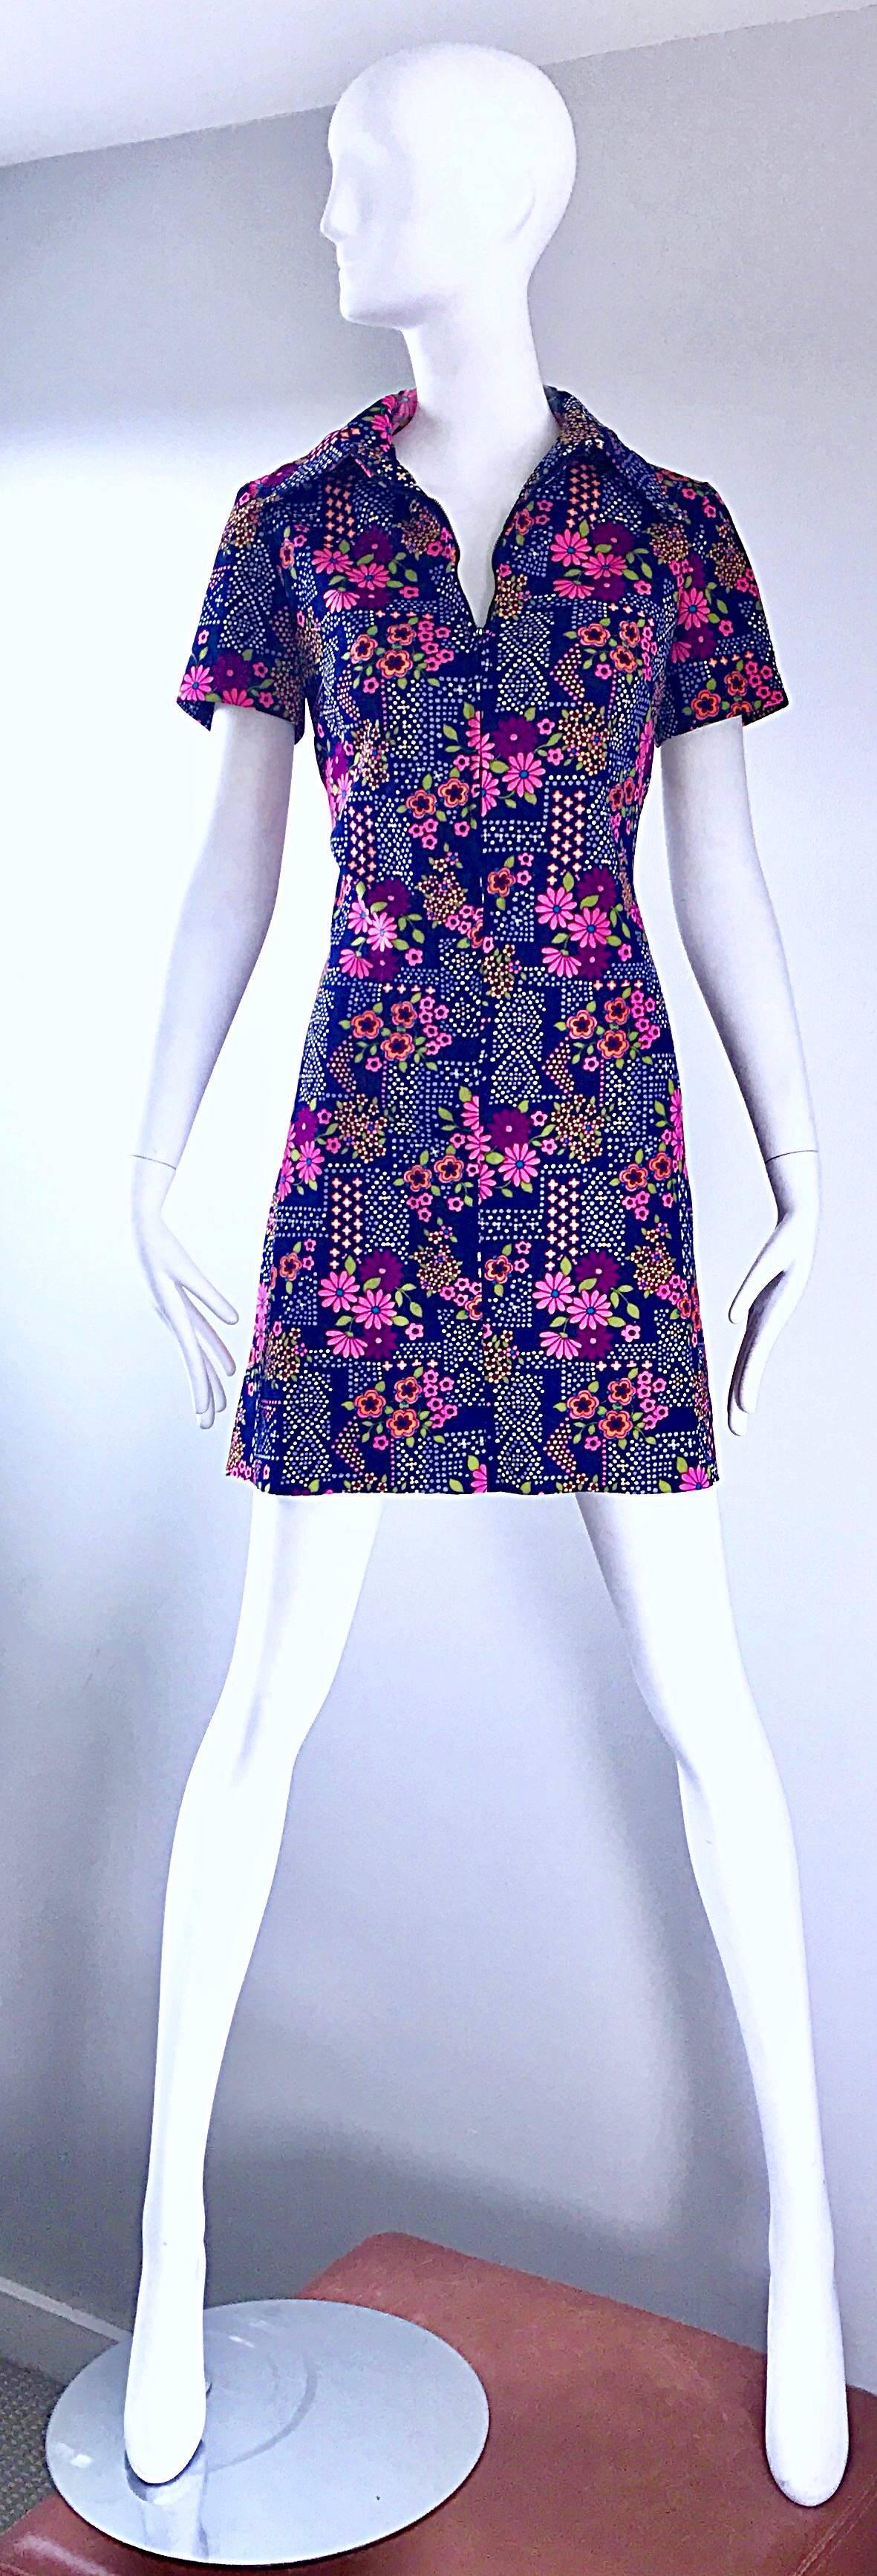 Such a chic 1960s colorful daisy printed mini shirt shift dress! Features a navy blue knit, with colorful daisies and geometric shapes throughout. Vibrant colors of pink, green, purple, yellow and orange throughout. Pointed collar, with a zipper up